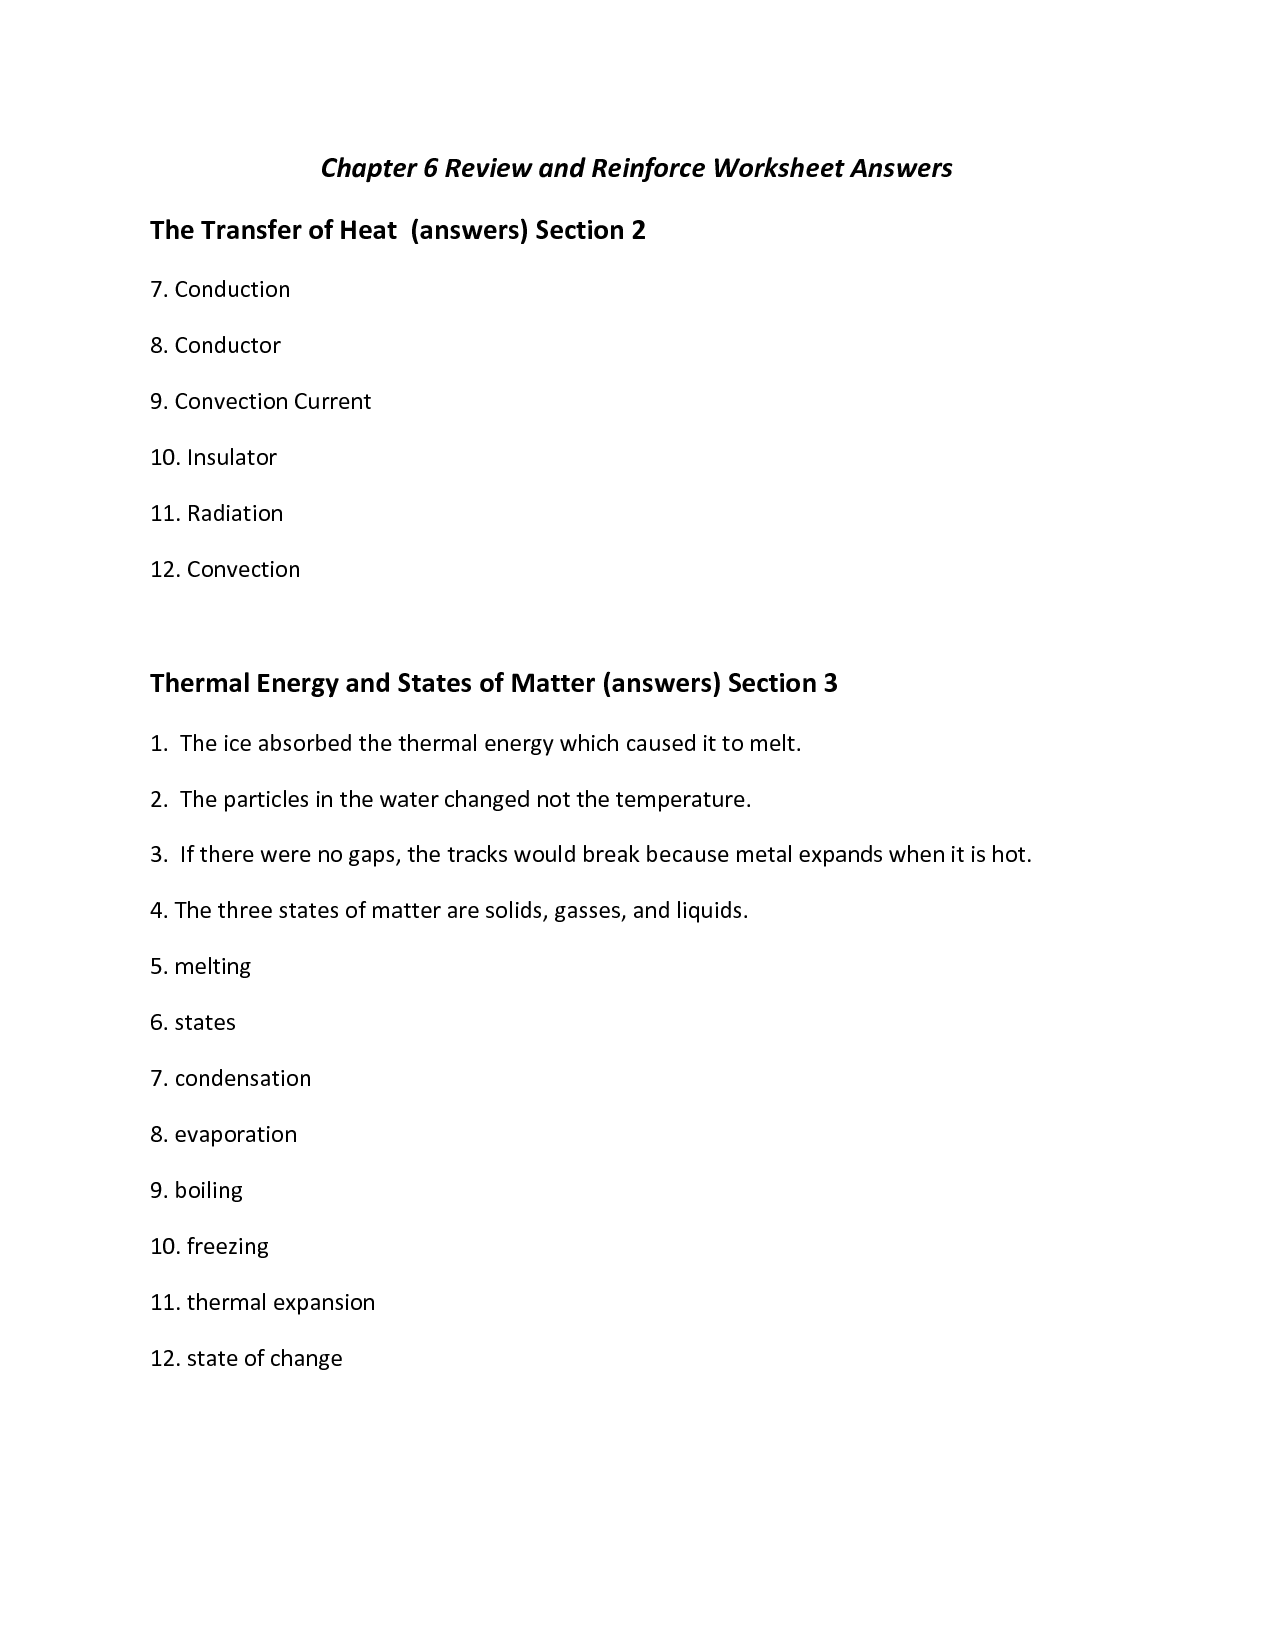 Thermal Energy Transfer Worksheet and Answers Image